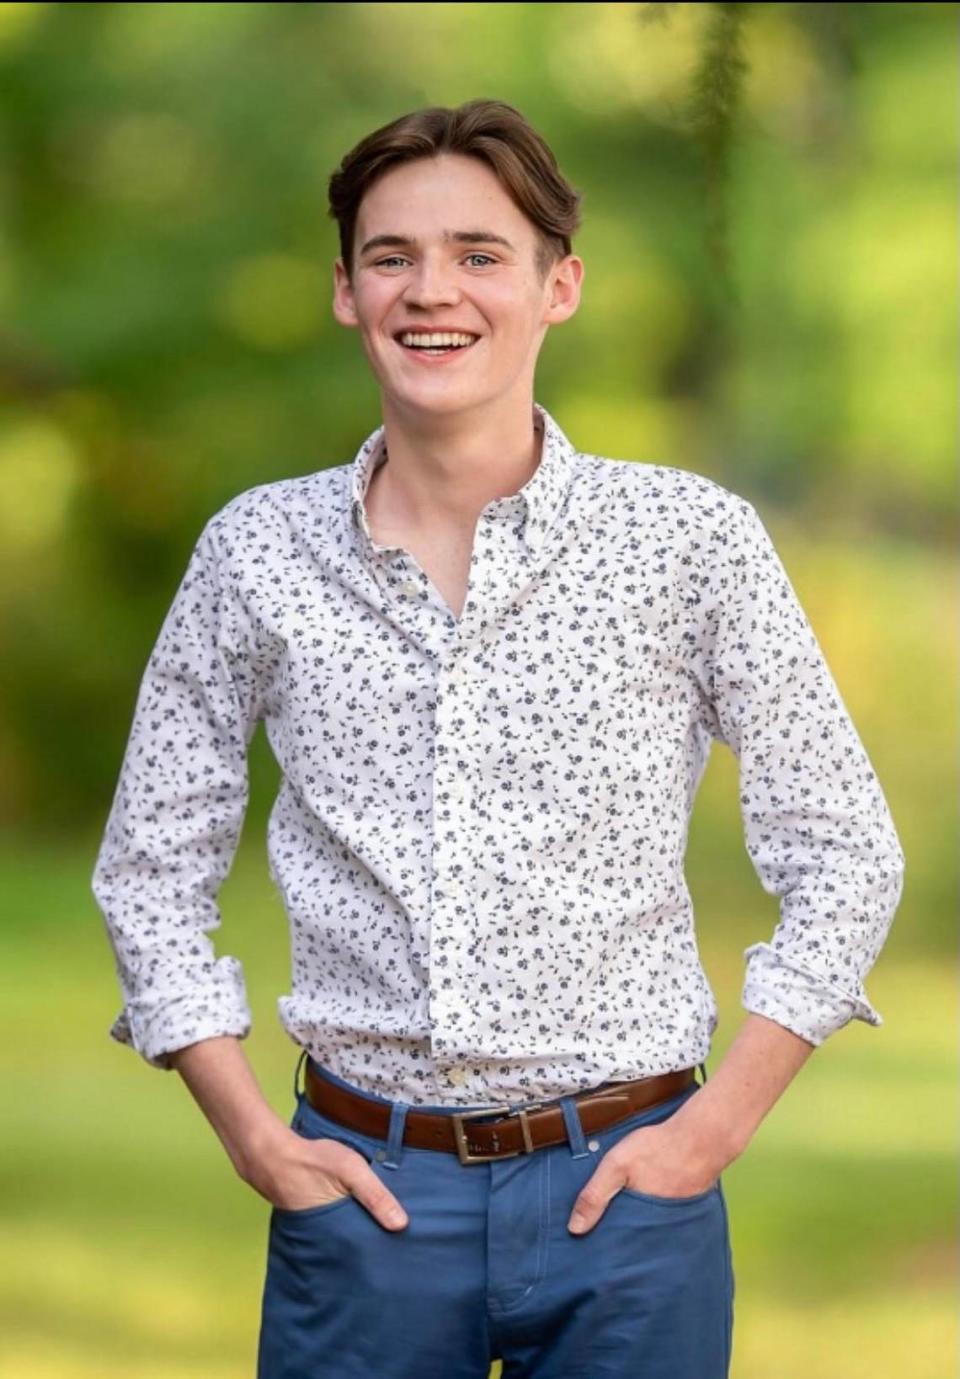 Chapin High School senior Dalton Perry, voted “Future governor of South Carolina” for The State’s “Best in Class.”